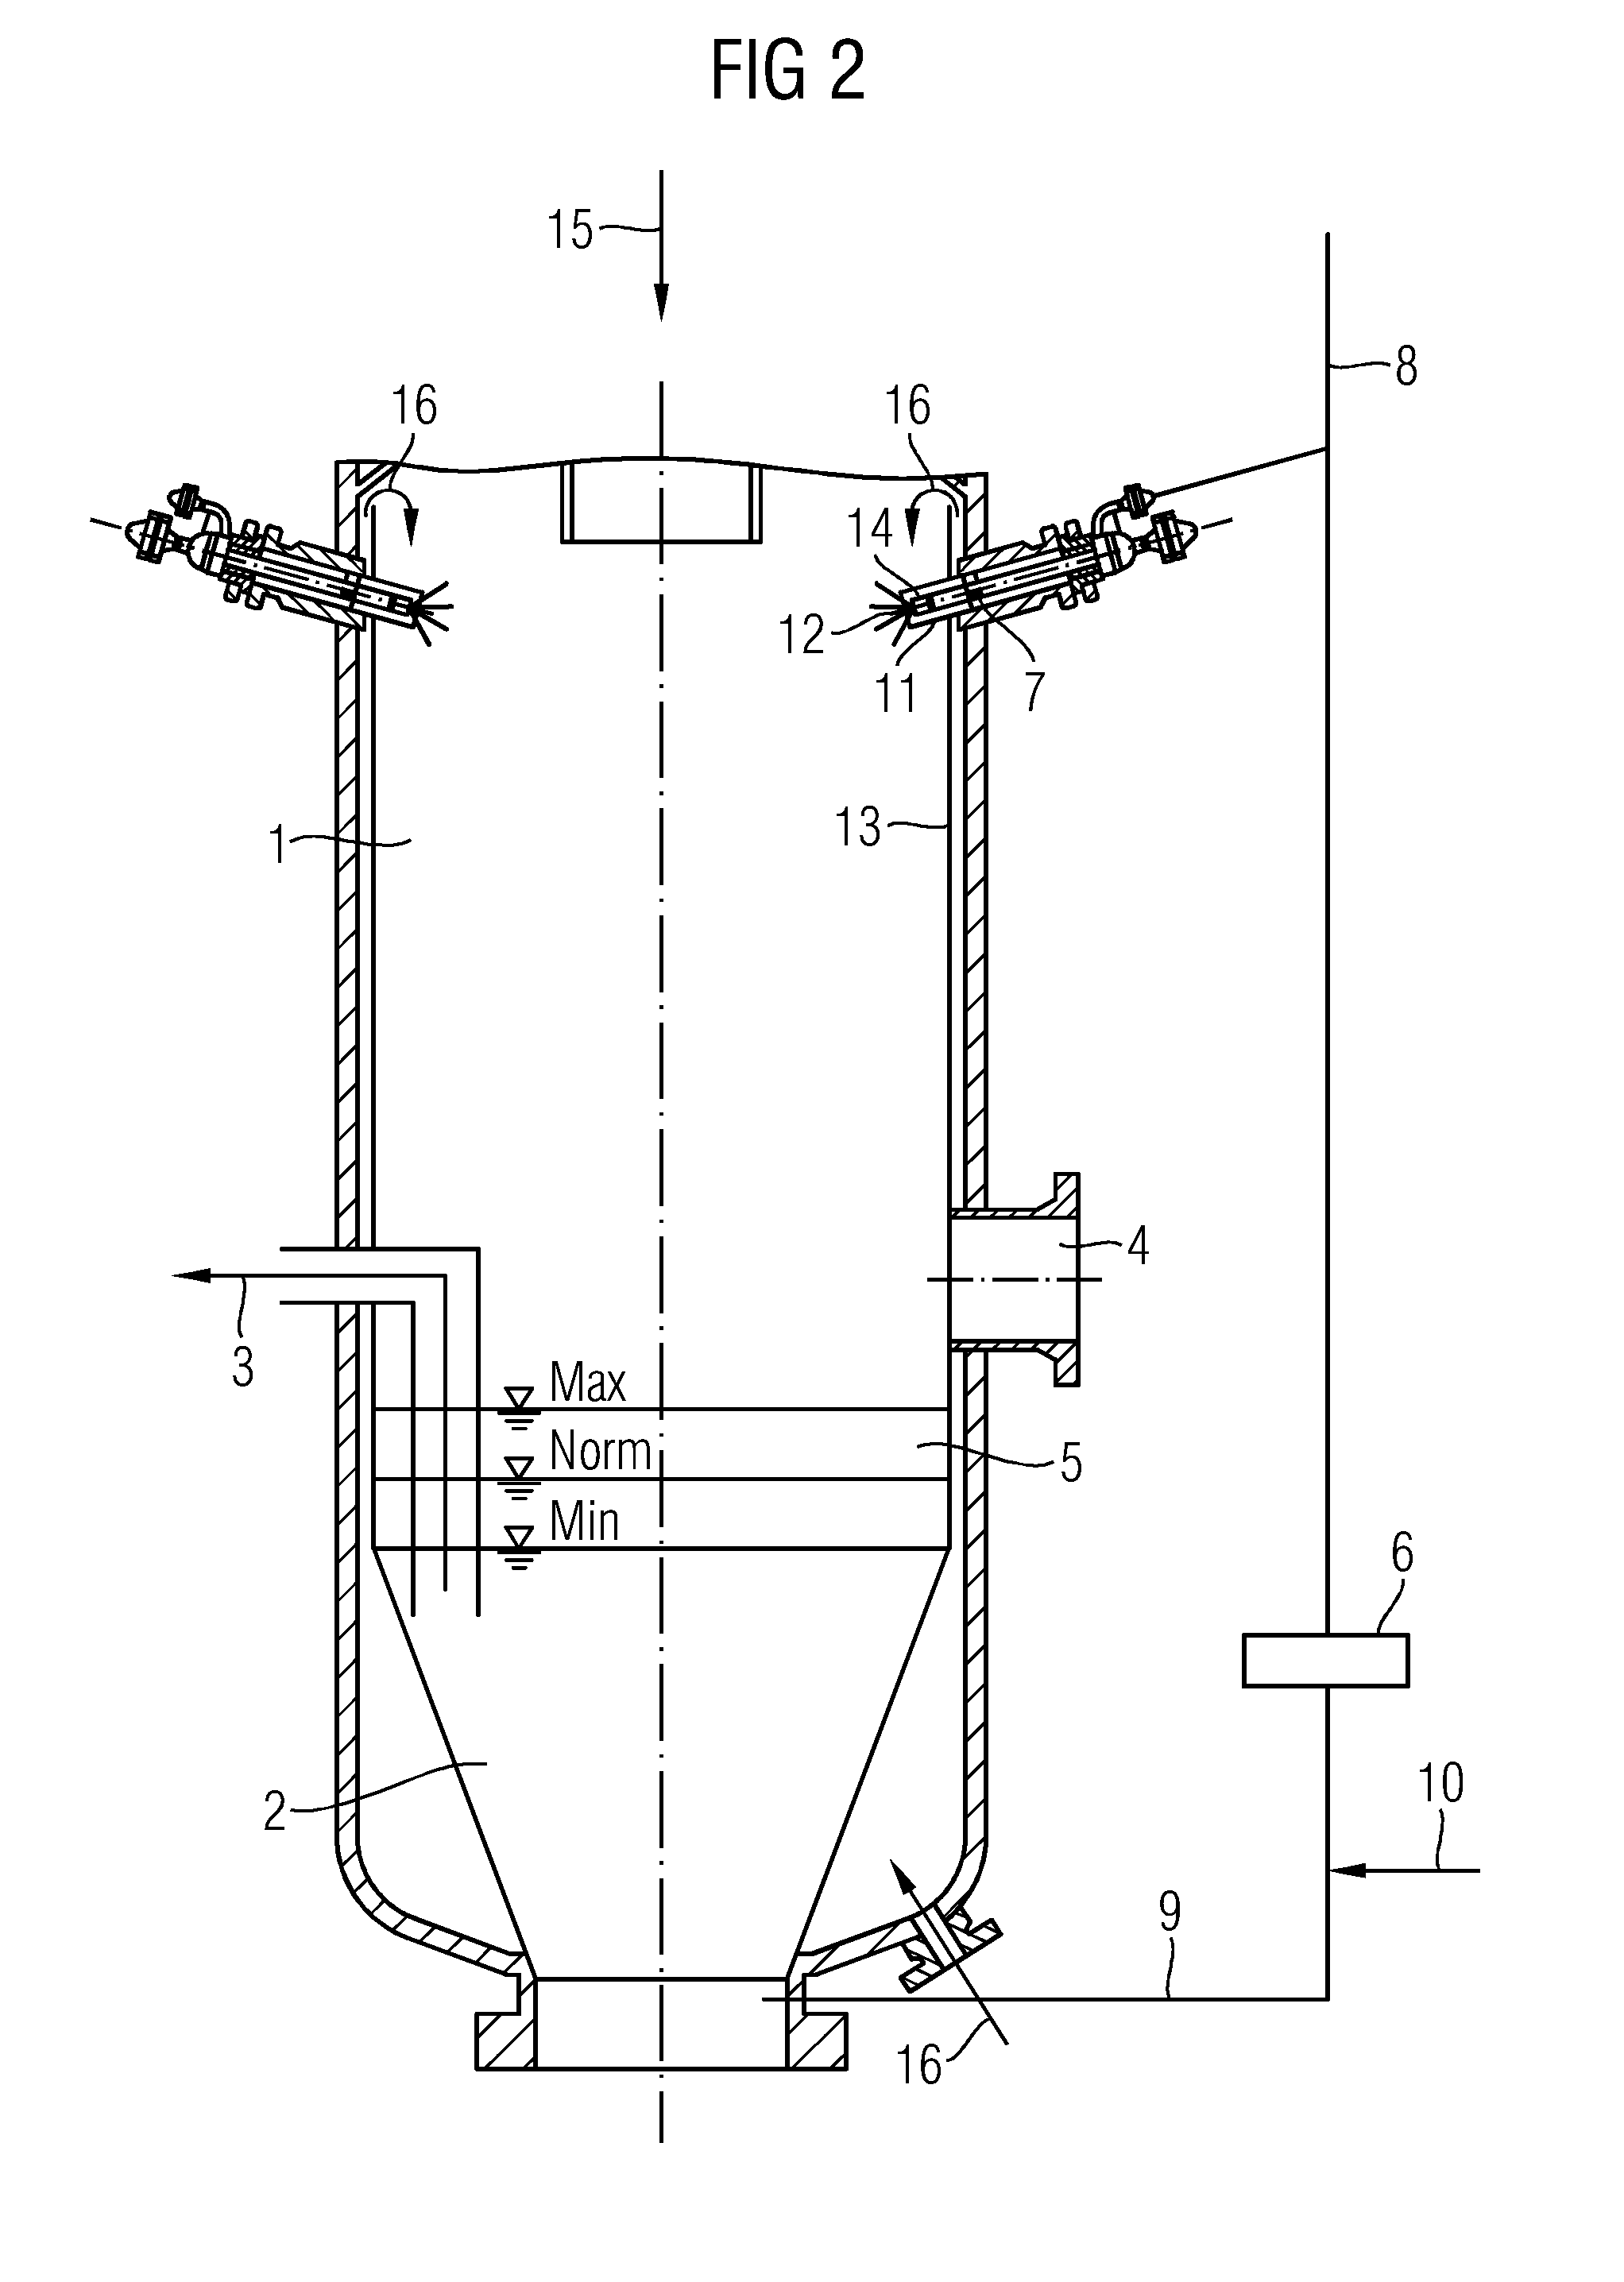 Device for reliable filling level control in a quenching chamber that is arranged downstream of entrained-flow gasification and has inert-gas flushing of the pressure-recording measuring location